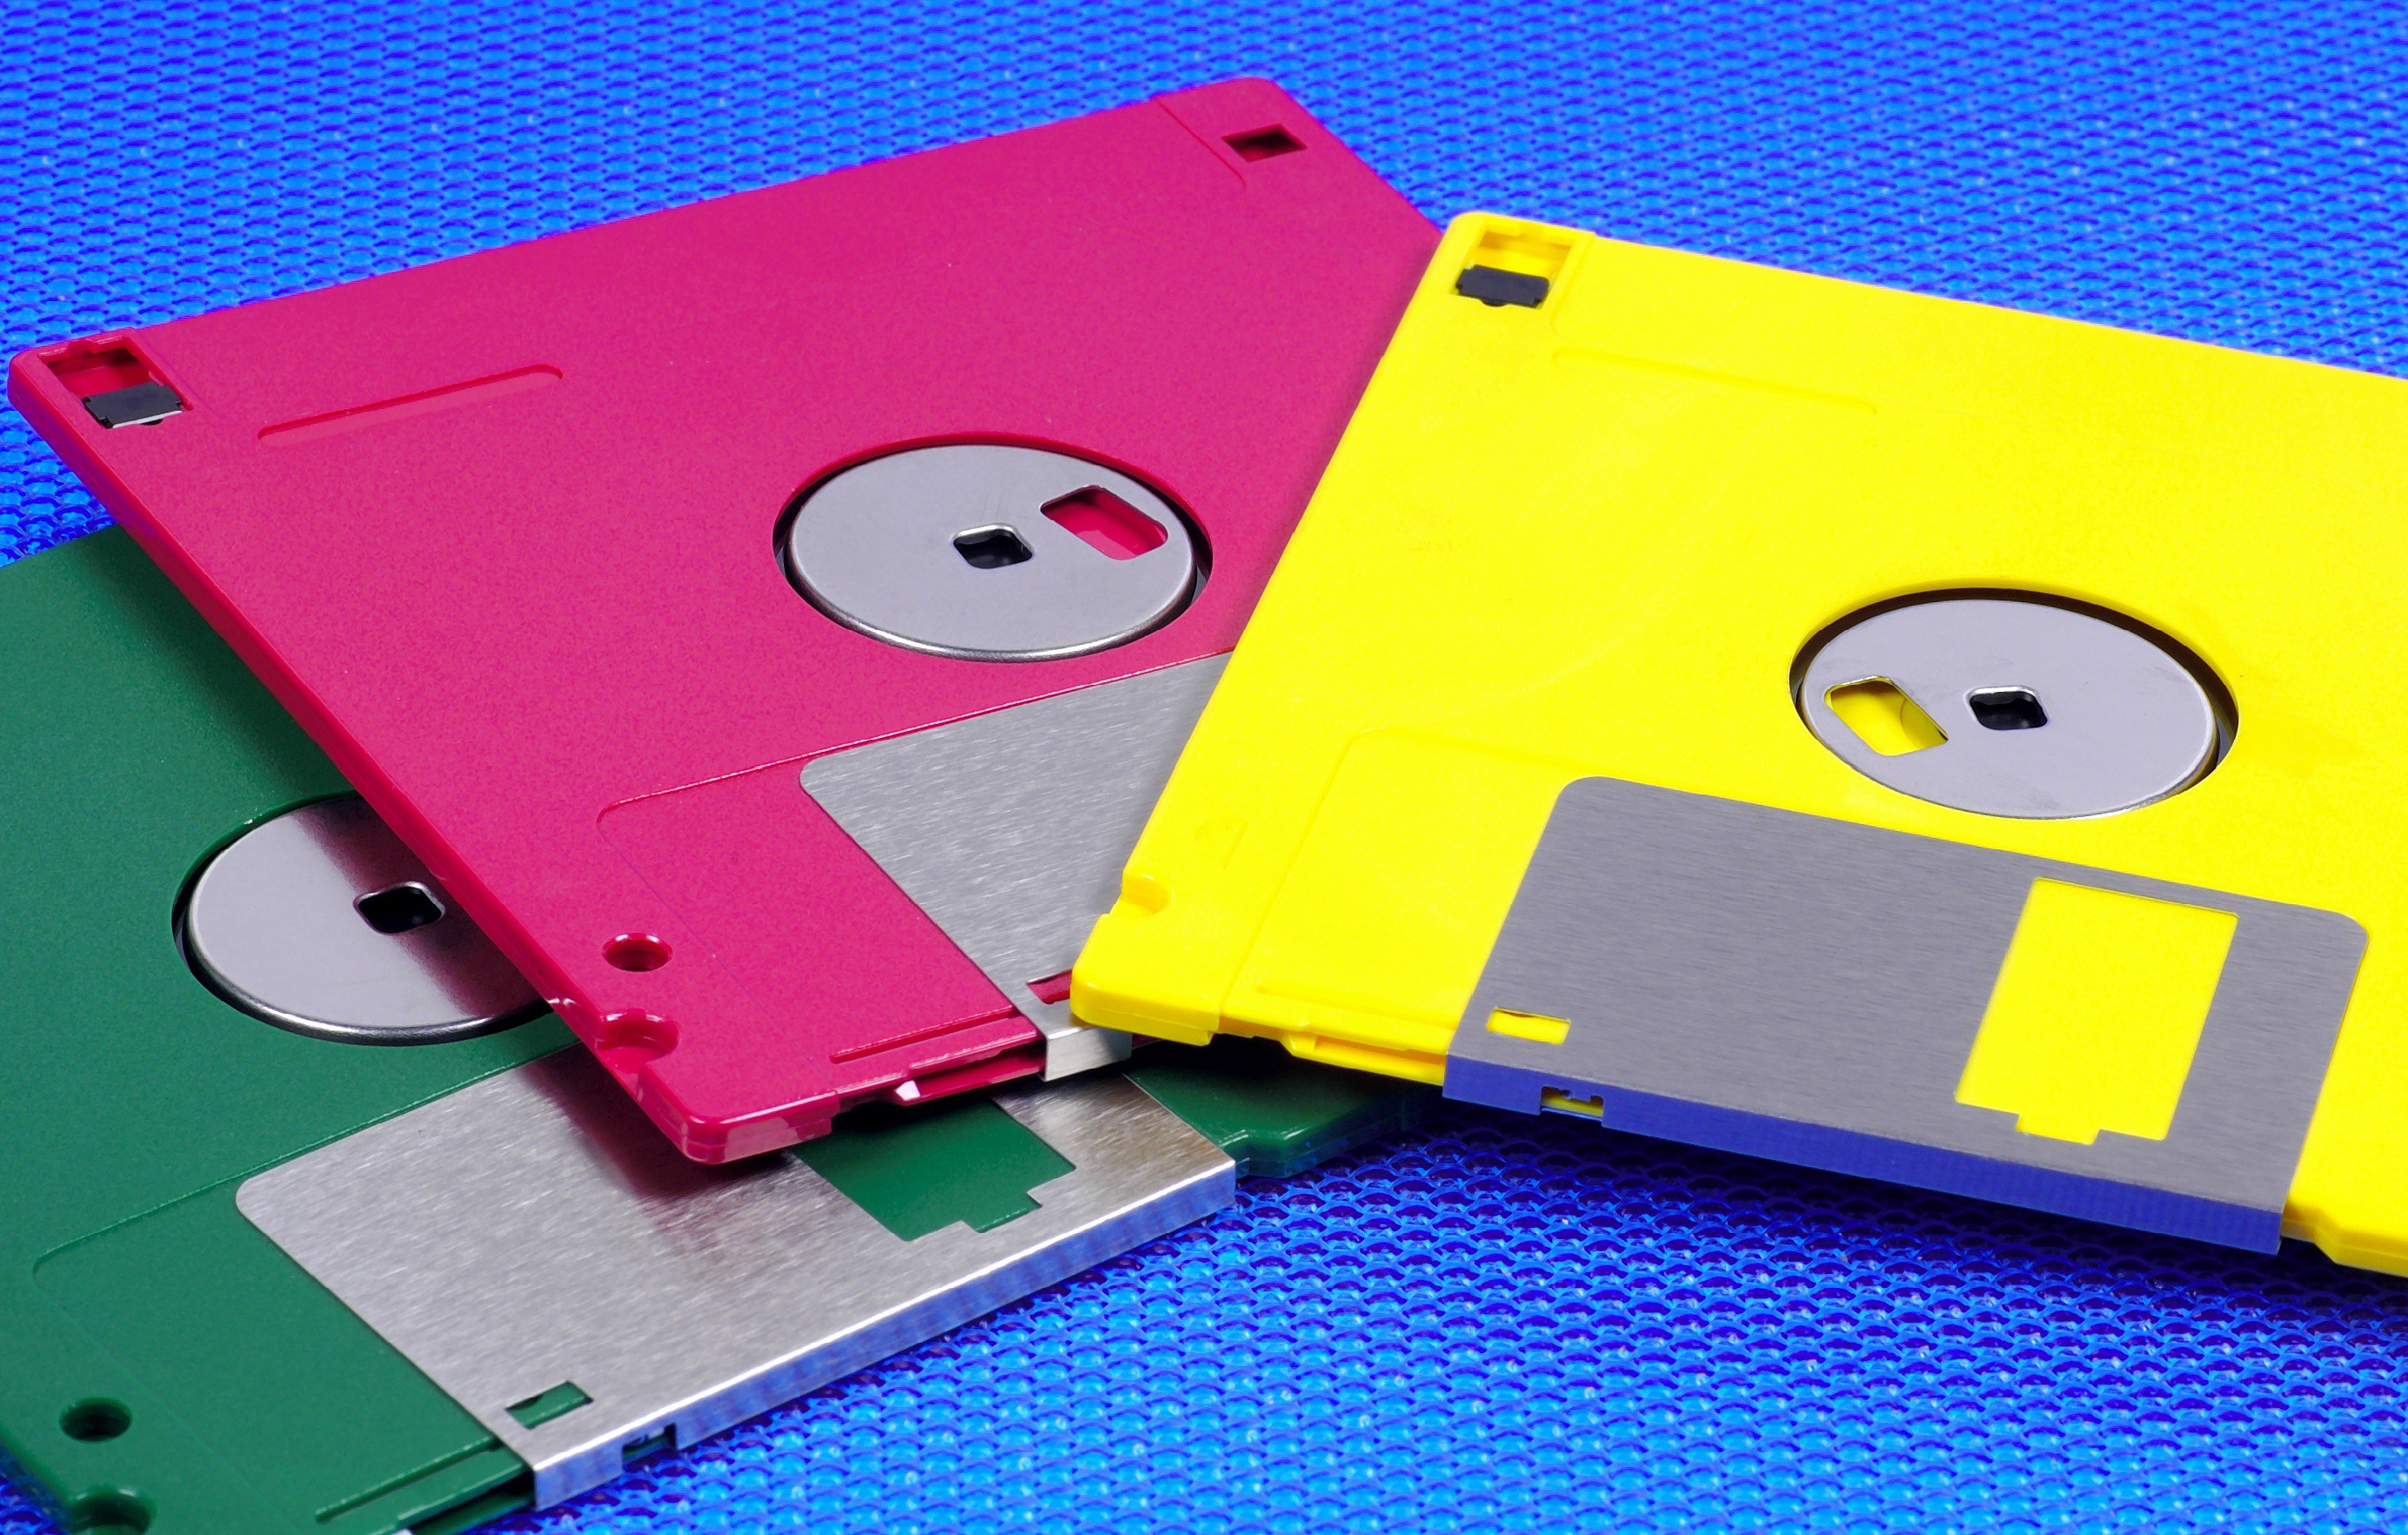 how to format a floppy disk in dos format